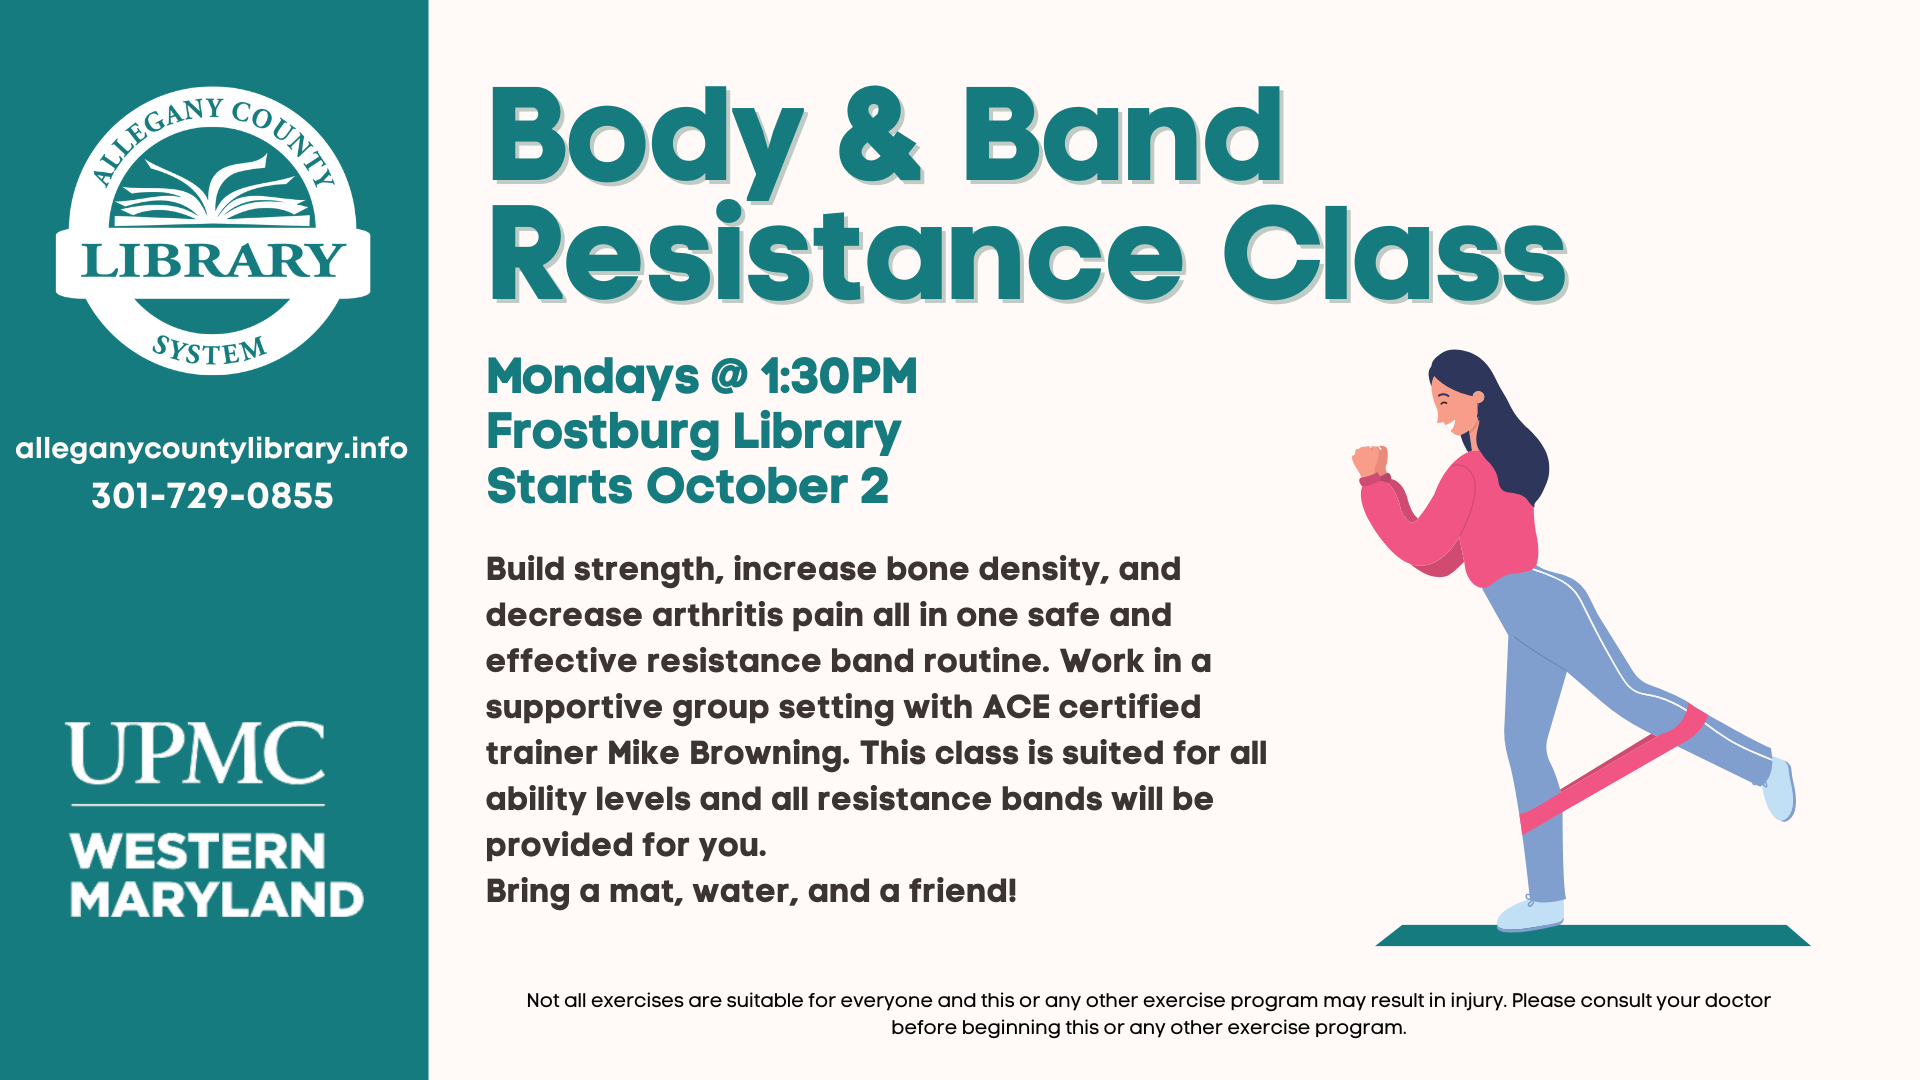 Body & Band Resistance Class details